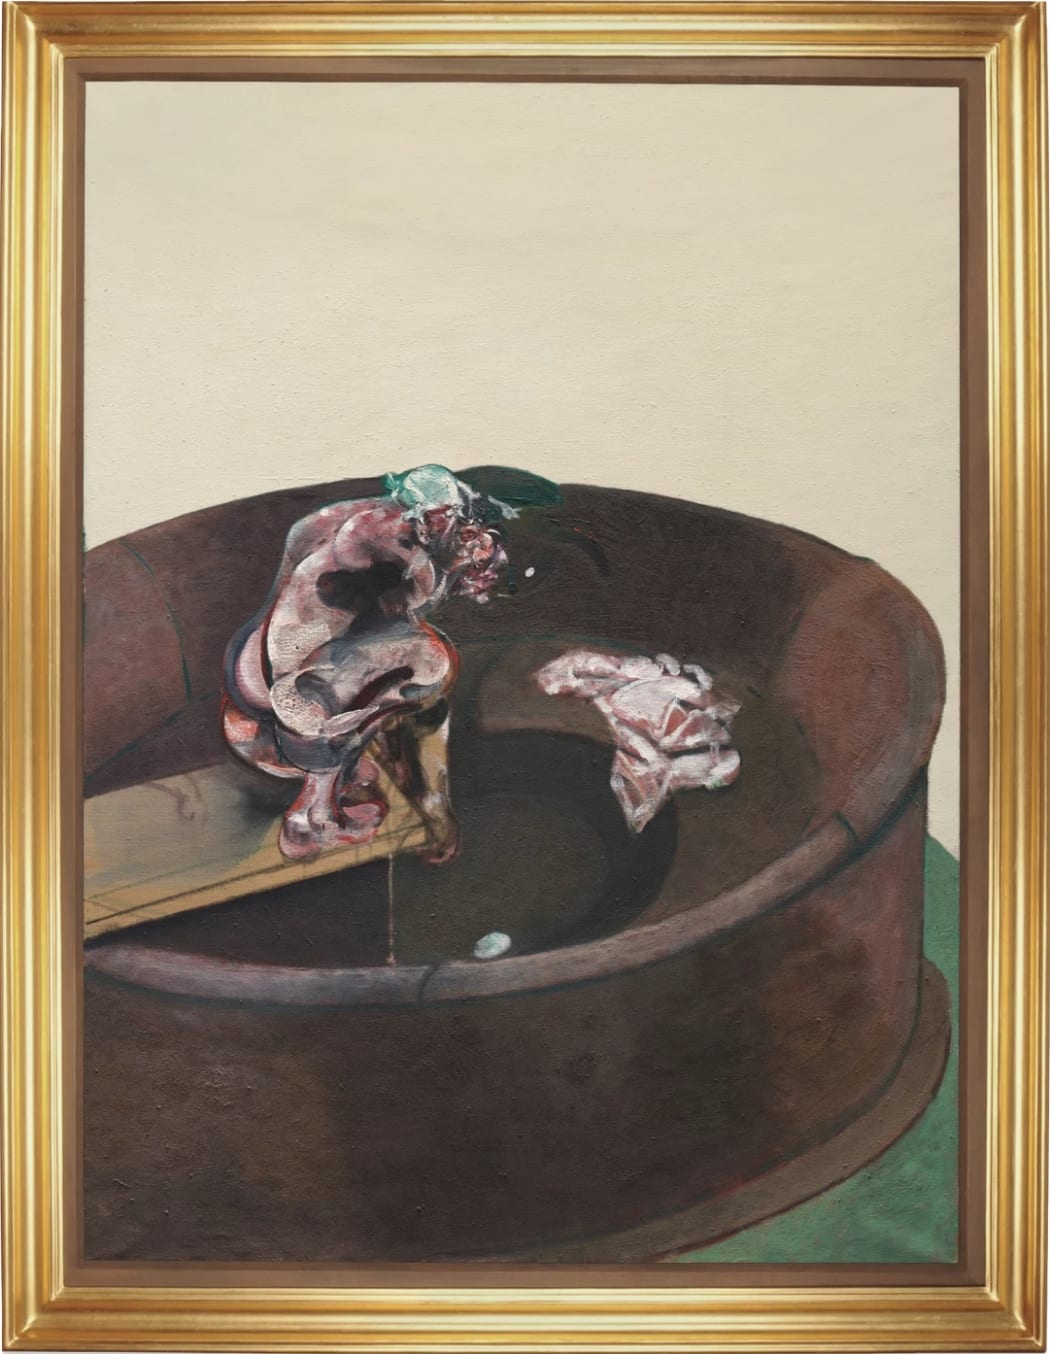 Francis Bacon's seminal 'Portrait of George Dyer Crouching' leads the May auction at Sotheby's, valued at $30-$50 million, this rare masterpiece marks its market debut after over fifty years in private hands. A true highlight for art collectors!